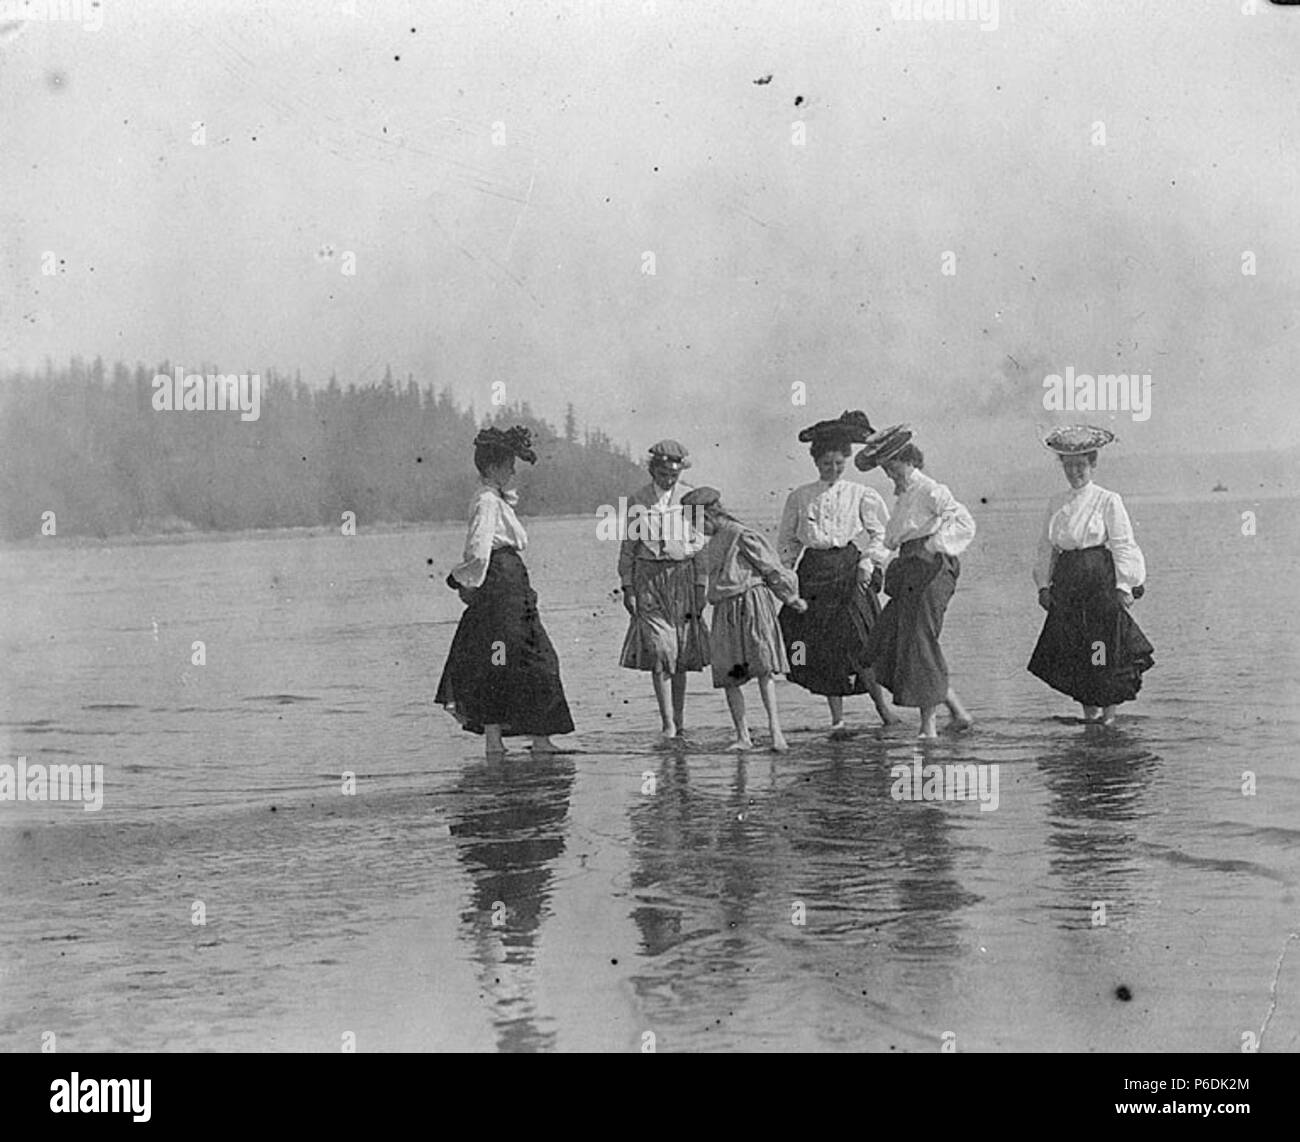 . English: Laura, Miriam and friends cooling their feet at South Beach below Fort Lawton, Washington, 1905 . English: Text from Kiehl log: Picnickers at Fort Lawton, 1905 Album 1.61 Subjects (LCSH): Kiehl, Laura; Kiehl, Miriam; Young women--Washington (State)--Seattle; Beaches--Washington (State)--Seattle; Magnolia (Seattle, Wash.) Concepts: Recreational activities  . 1905 60 Laura, Miriam and friends cooling their feet at South Beach below Fort Lawton, Washington, 1905 (KIEHL 274) Stock Photo